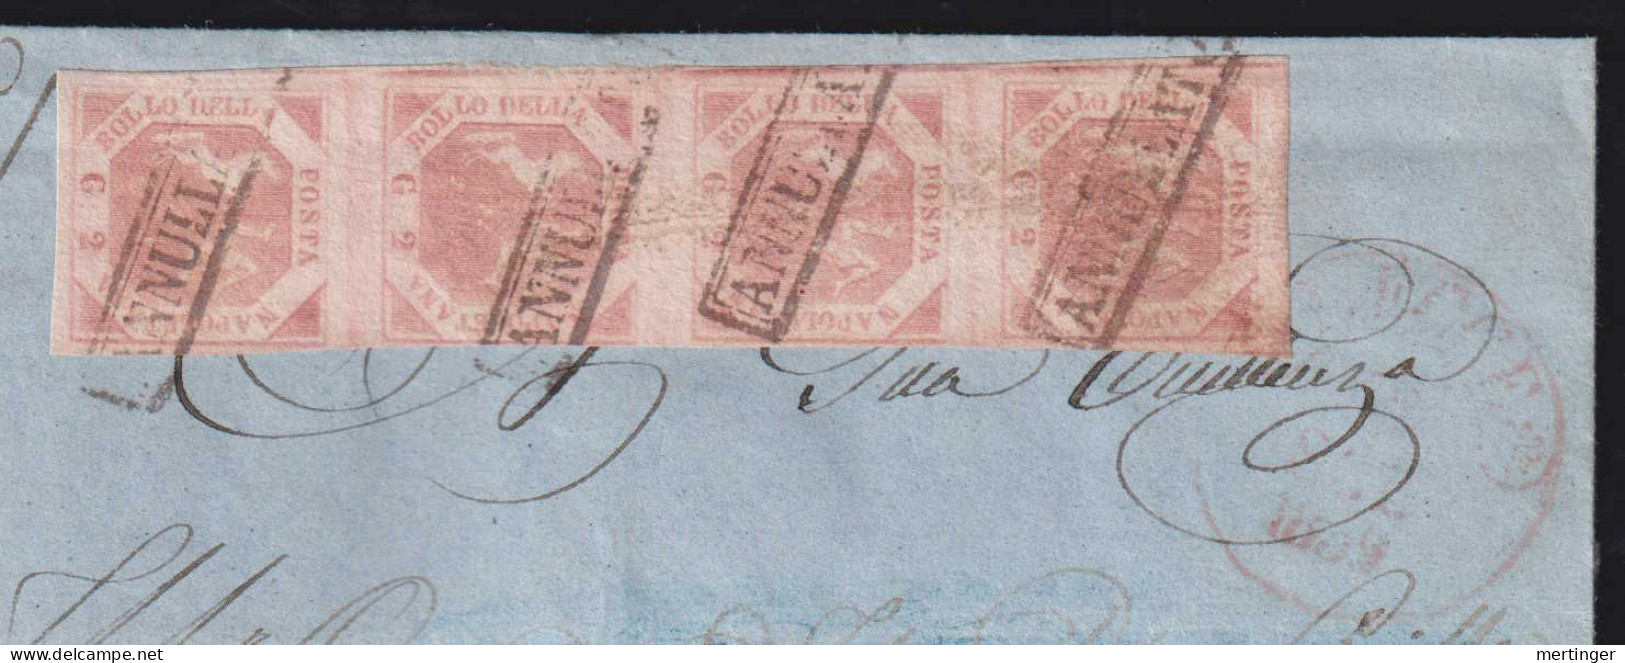 Italy Napoli 1859 Registered Cover Local Use 5x 2G + 20G - Neapel